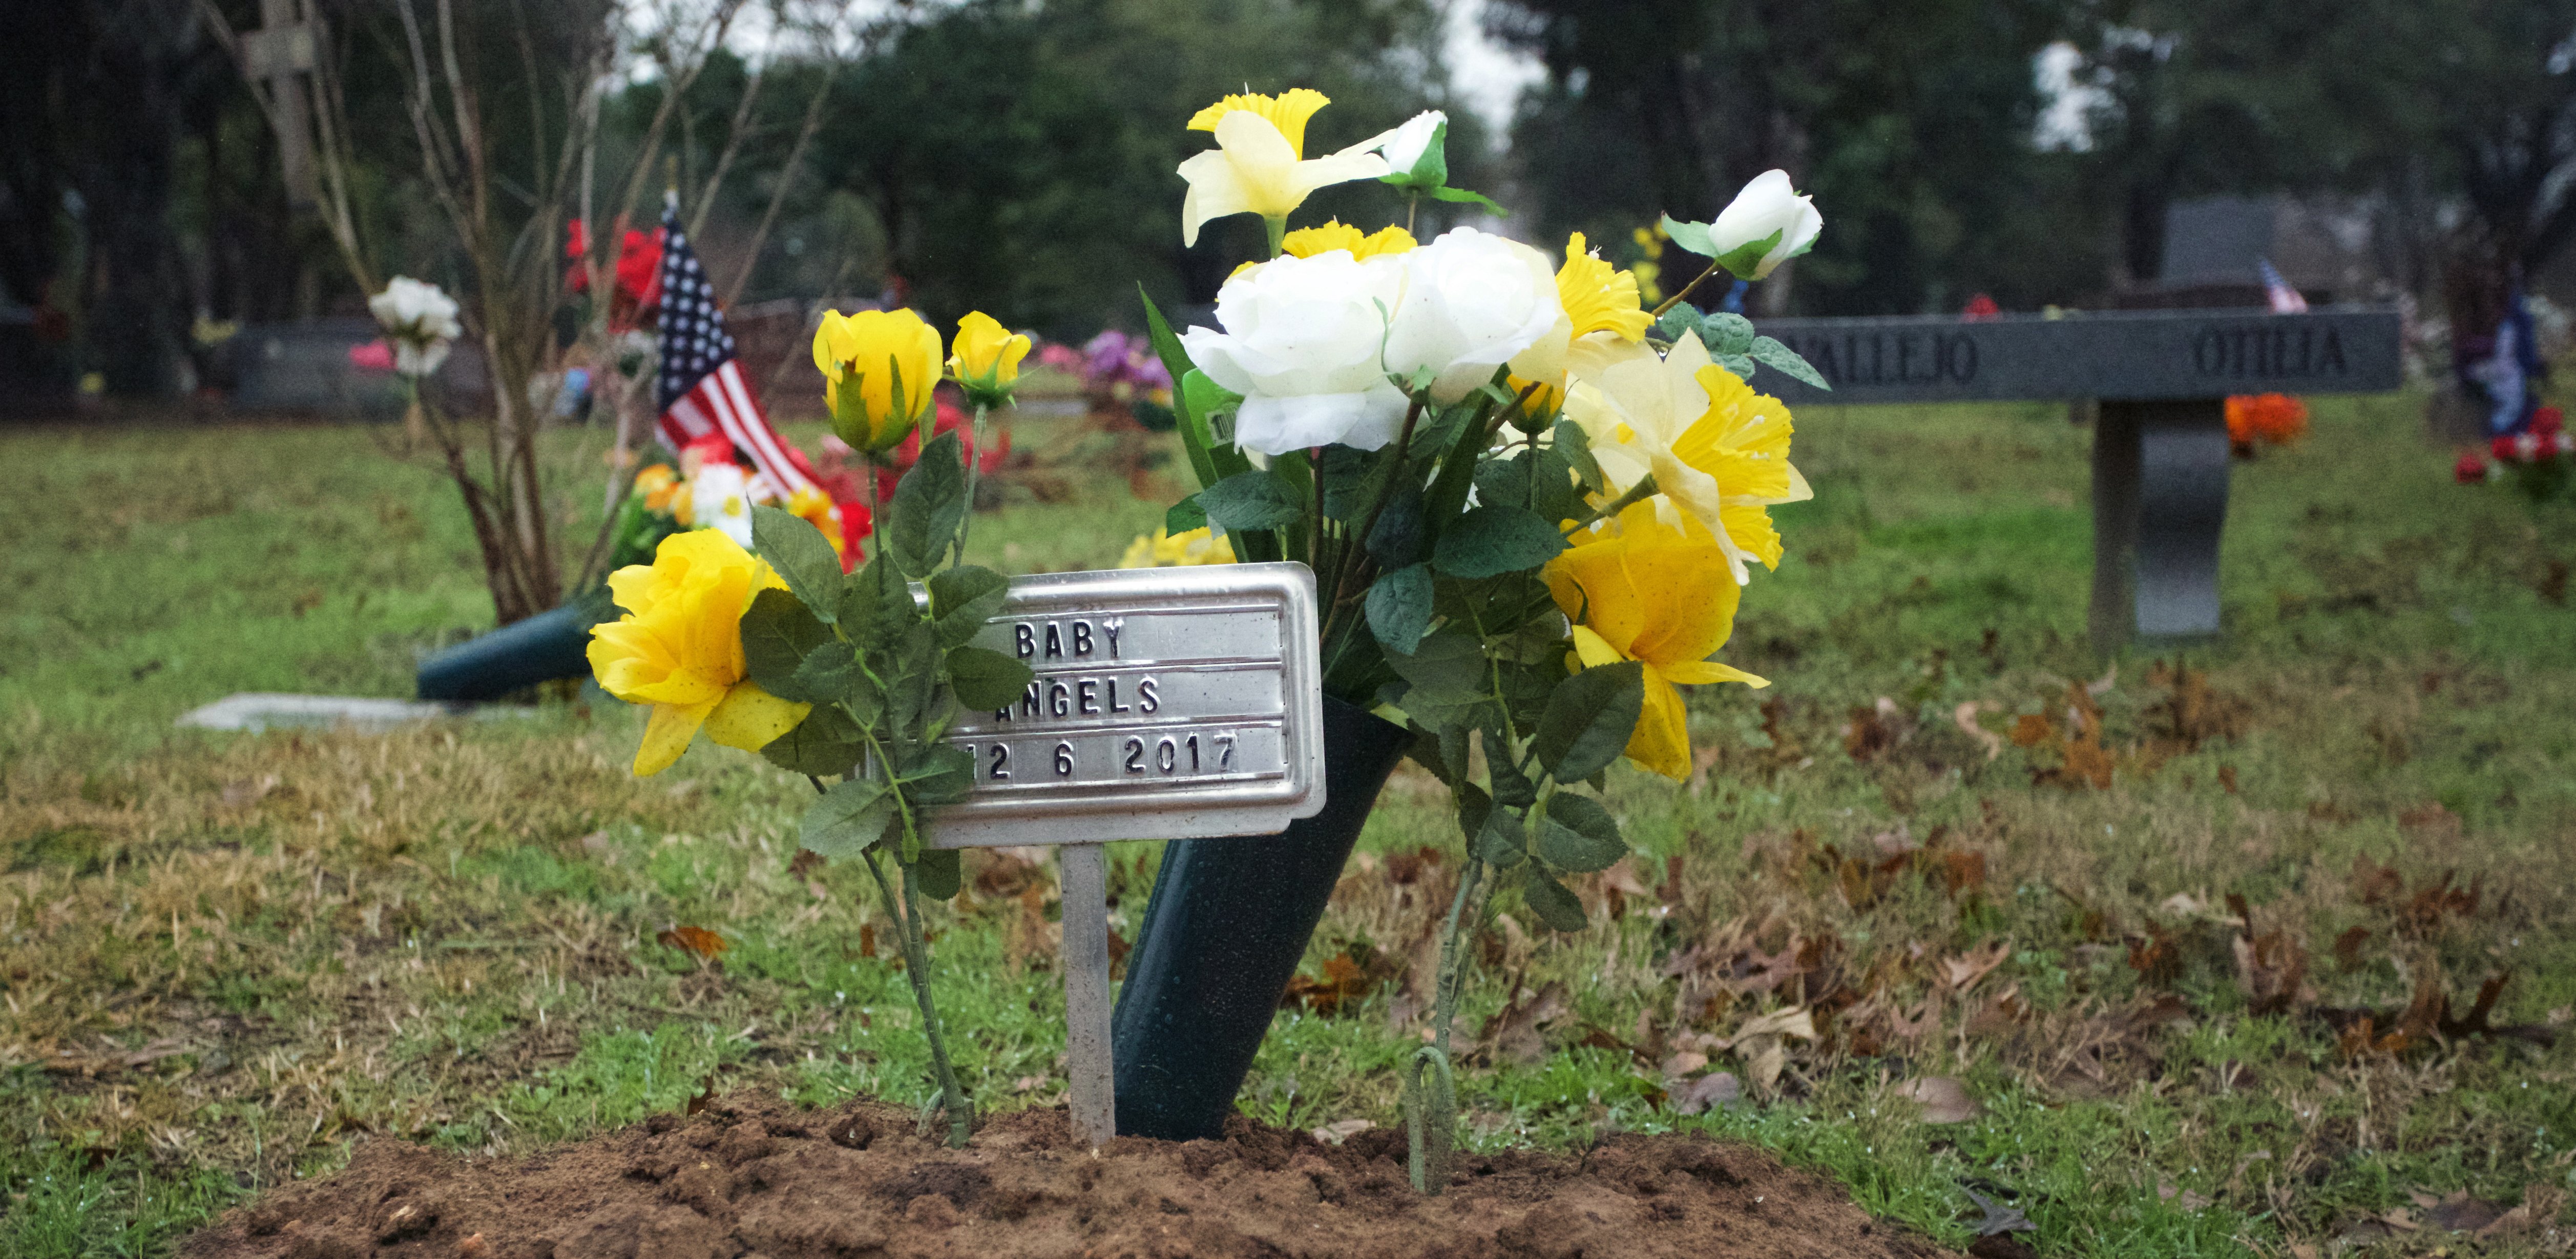 a small grave marked with the placard "baby angels" surrounded by yellow flowers